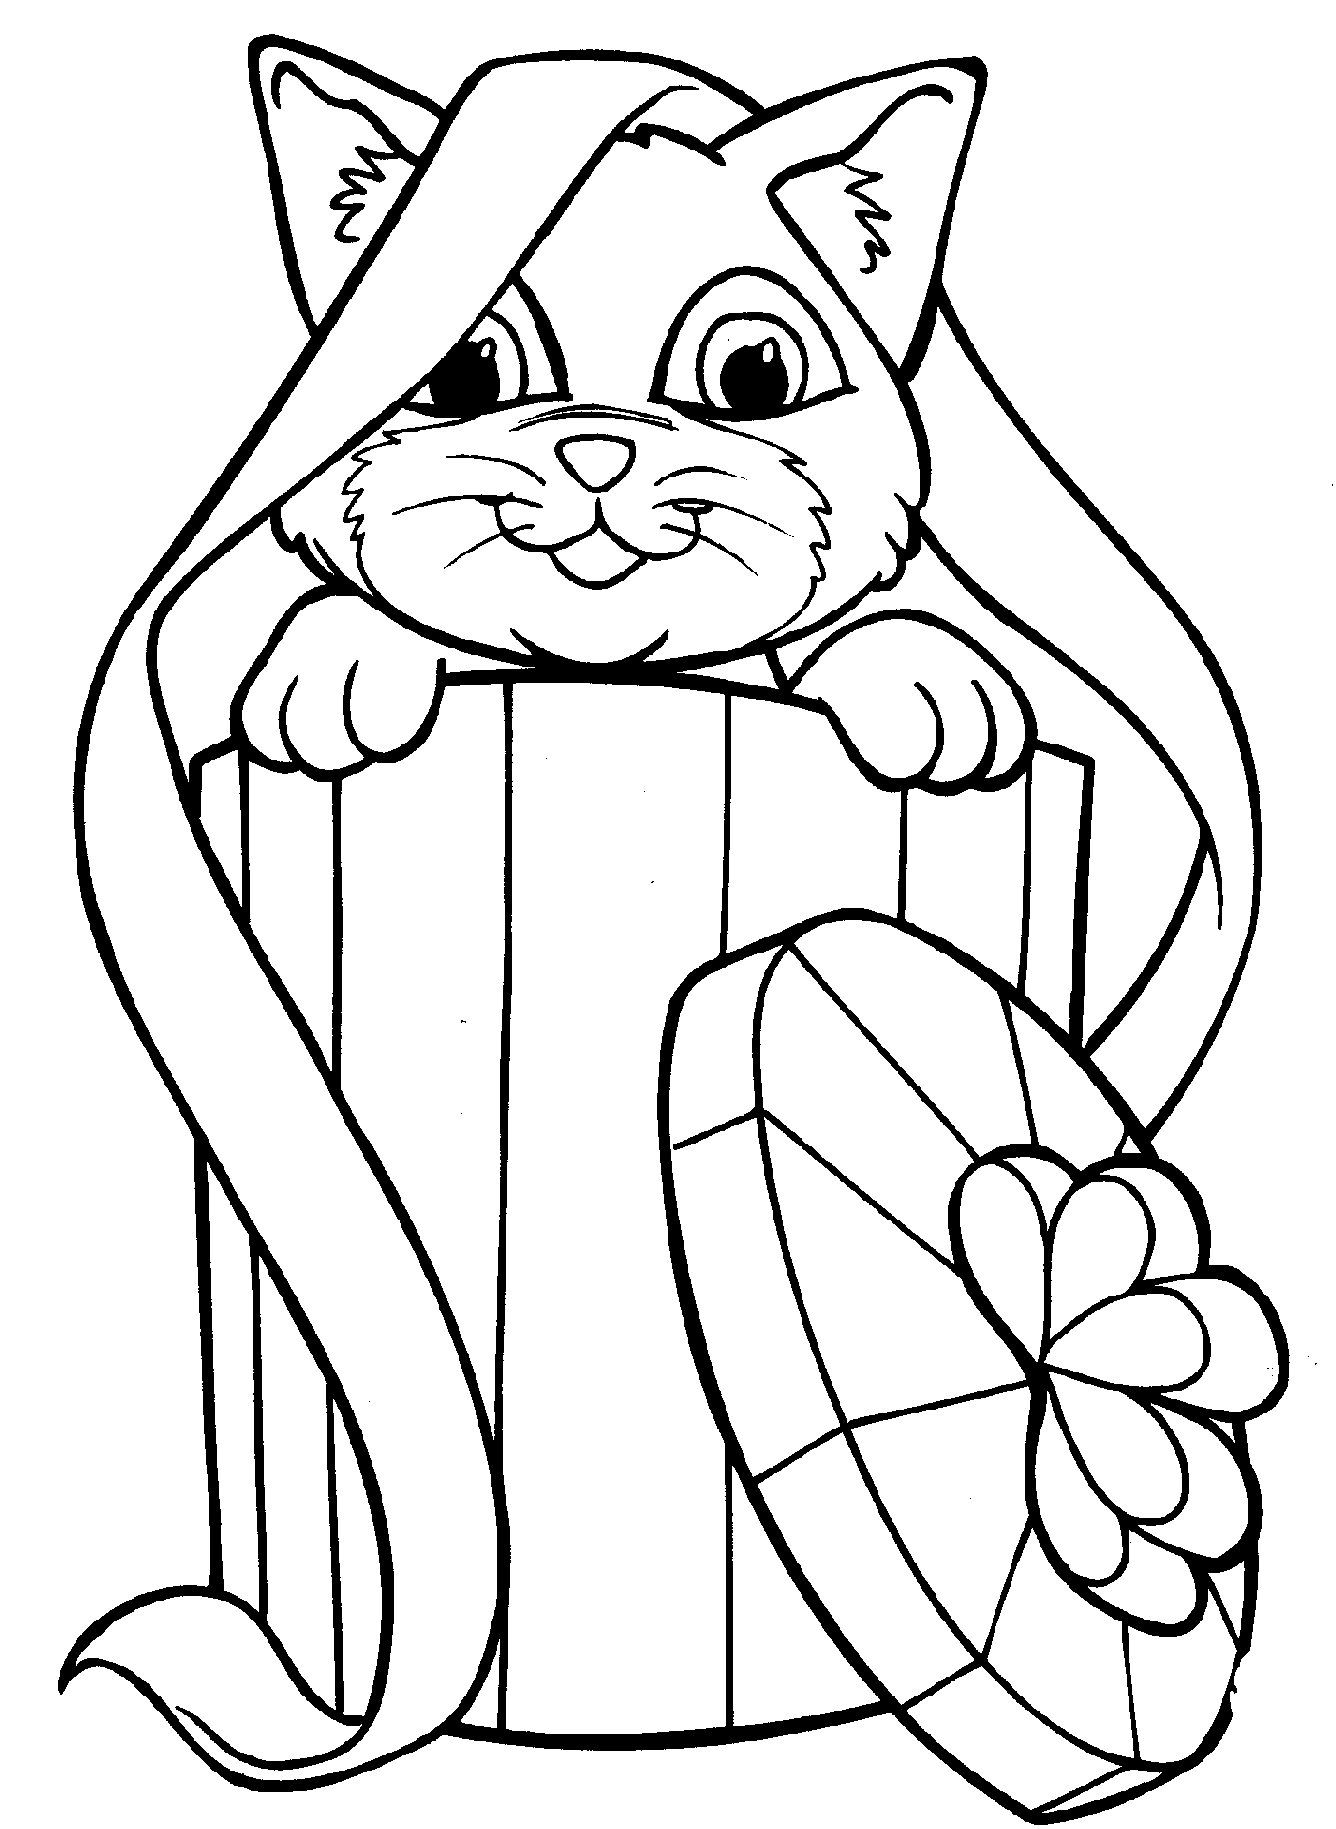 printable cats free printable cat coloring pages for kids printable cats 1 3